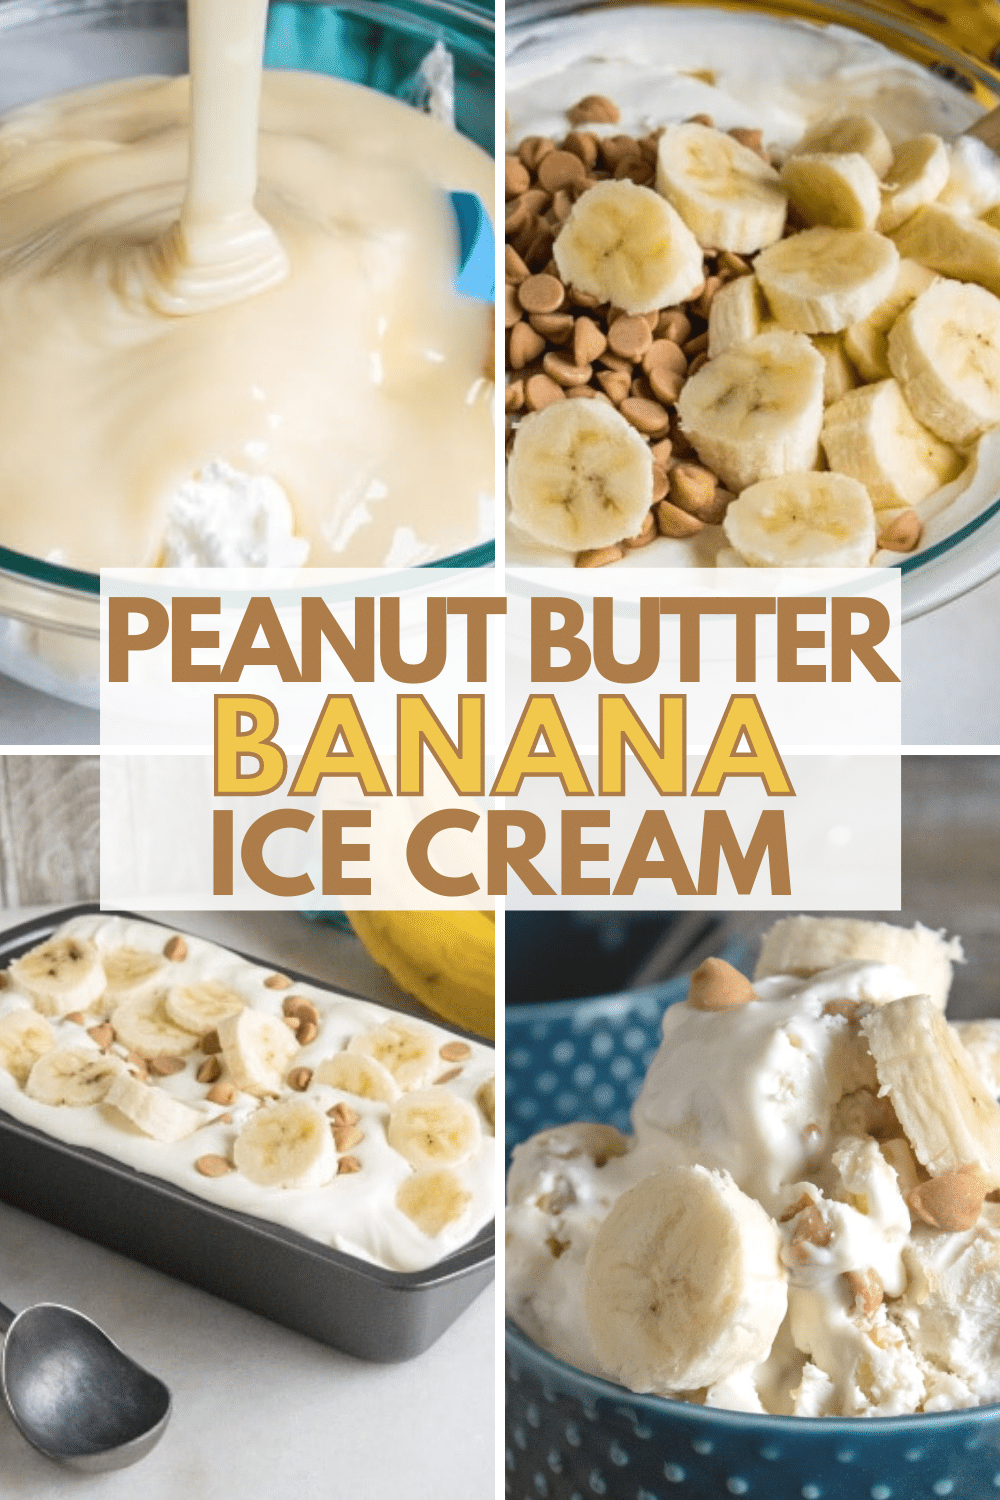 This easy homemade peanut butter banana ice cream is a simple no-churn recipe with only 5 ingredients. This will become a favorite homemade ice cream. #icecream #nochurn #dessert #peanutbutterbanana via @wondermomwannab